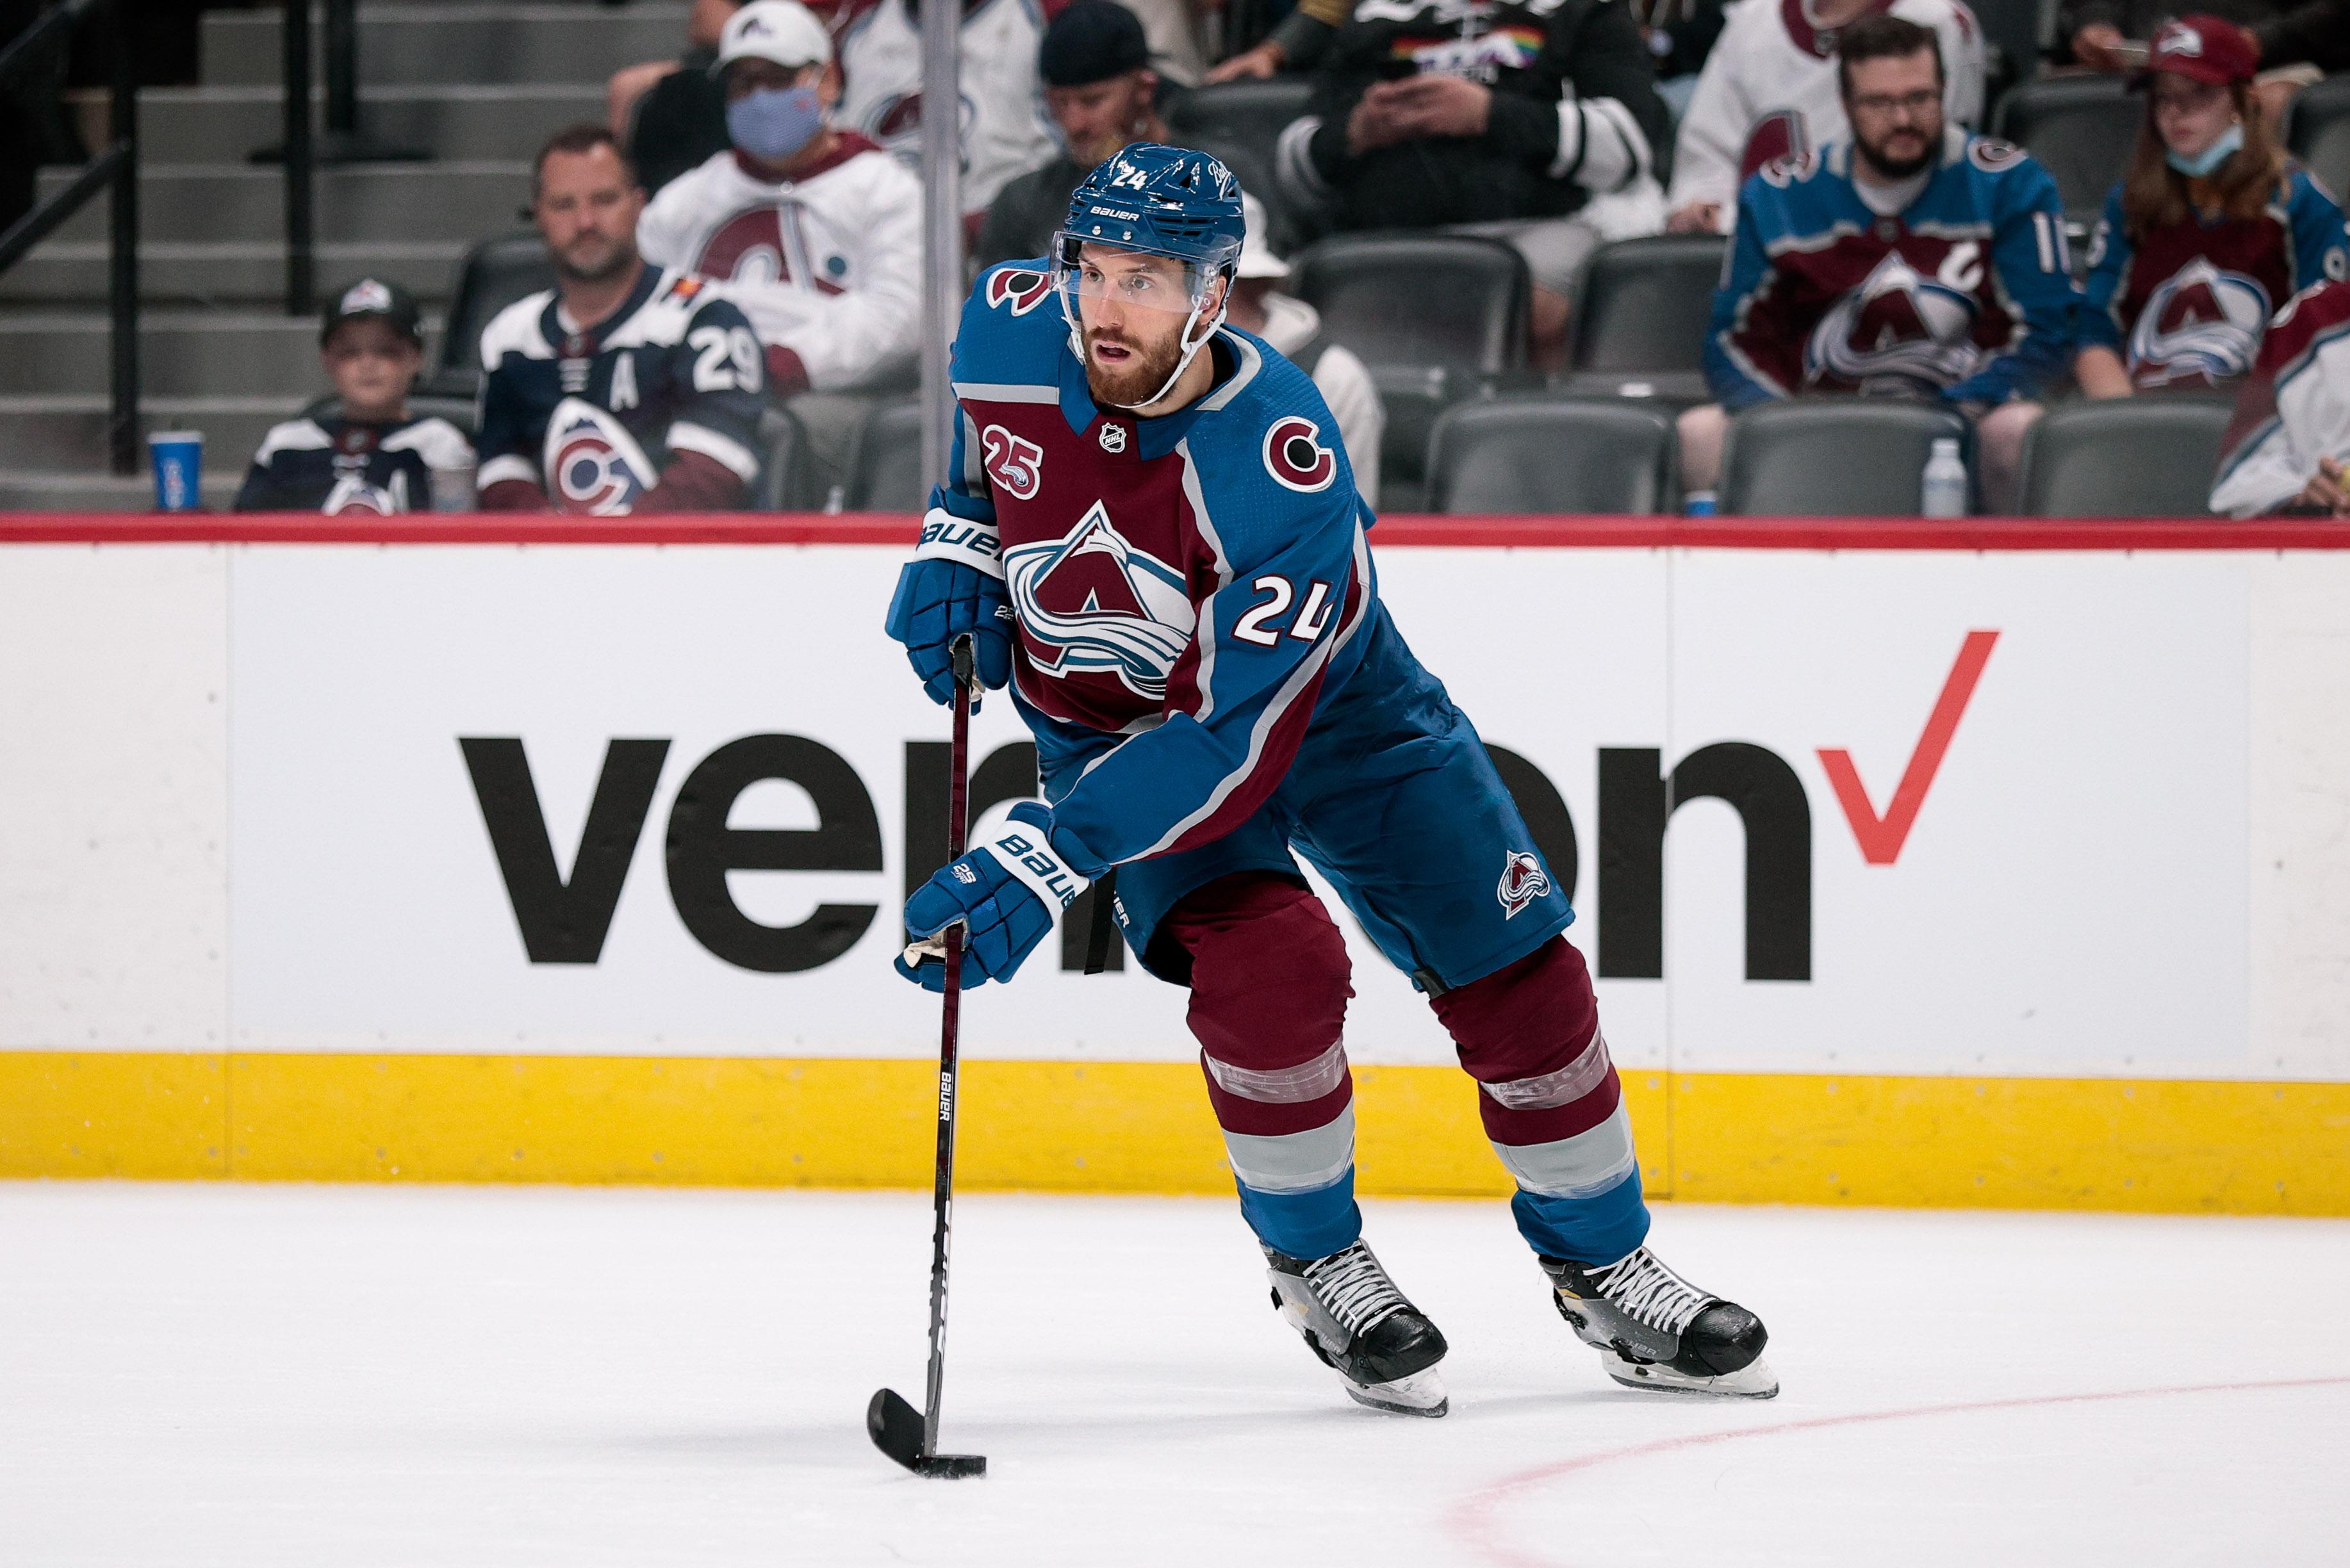 Colorado Avalanche defenseman Patrik Nemeth (24) controls the puck in the first period against the Vegas Golden Knights in game five of the second round of the 2021 Stanley Cup Playoffs at Ball Arena. / Isaiah J. Downing-USA TODAY Sports